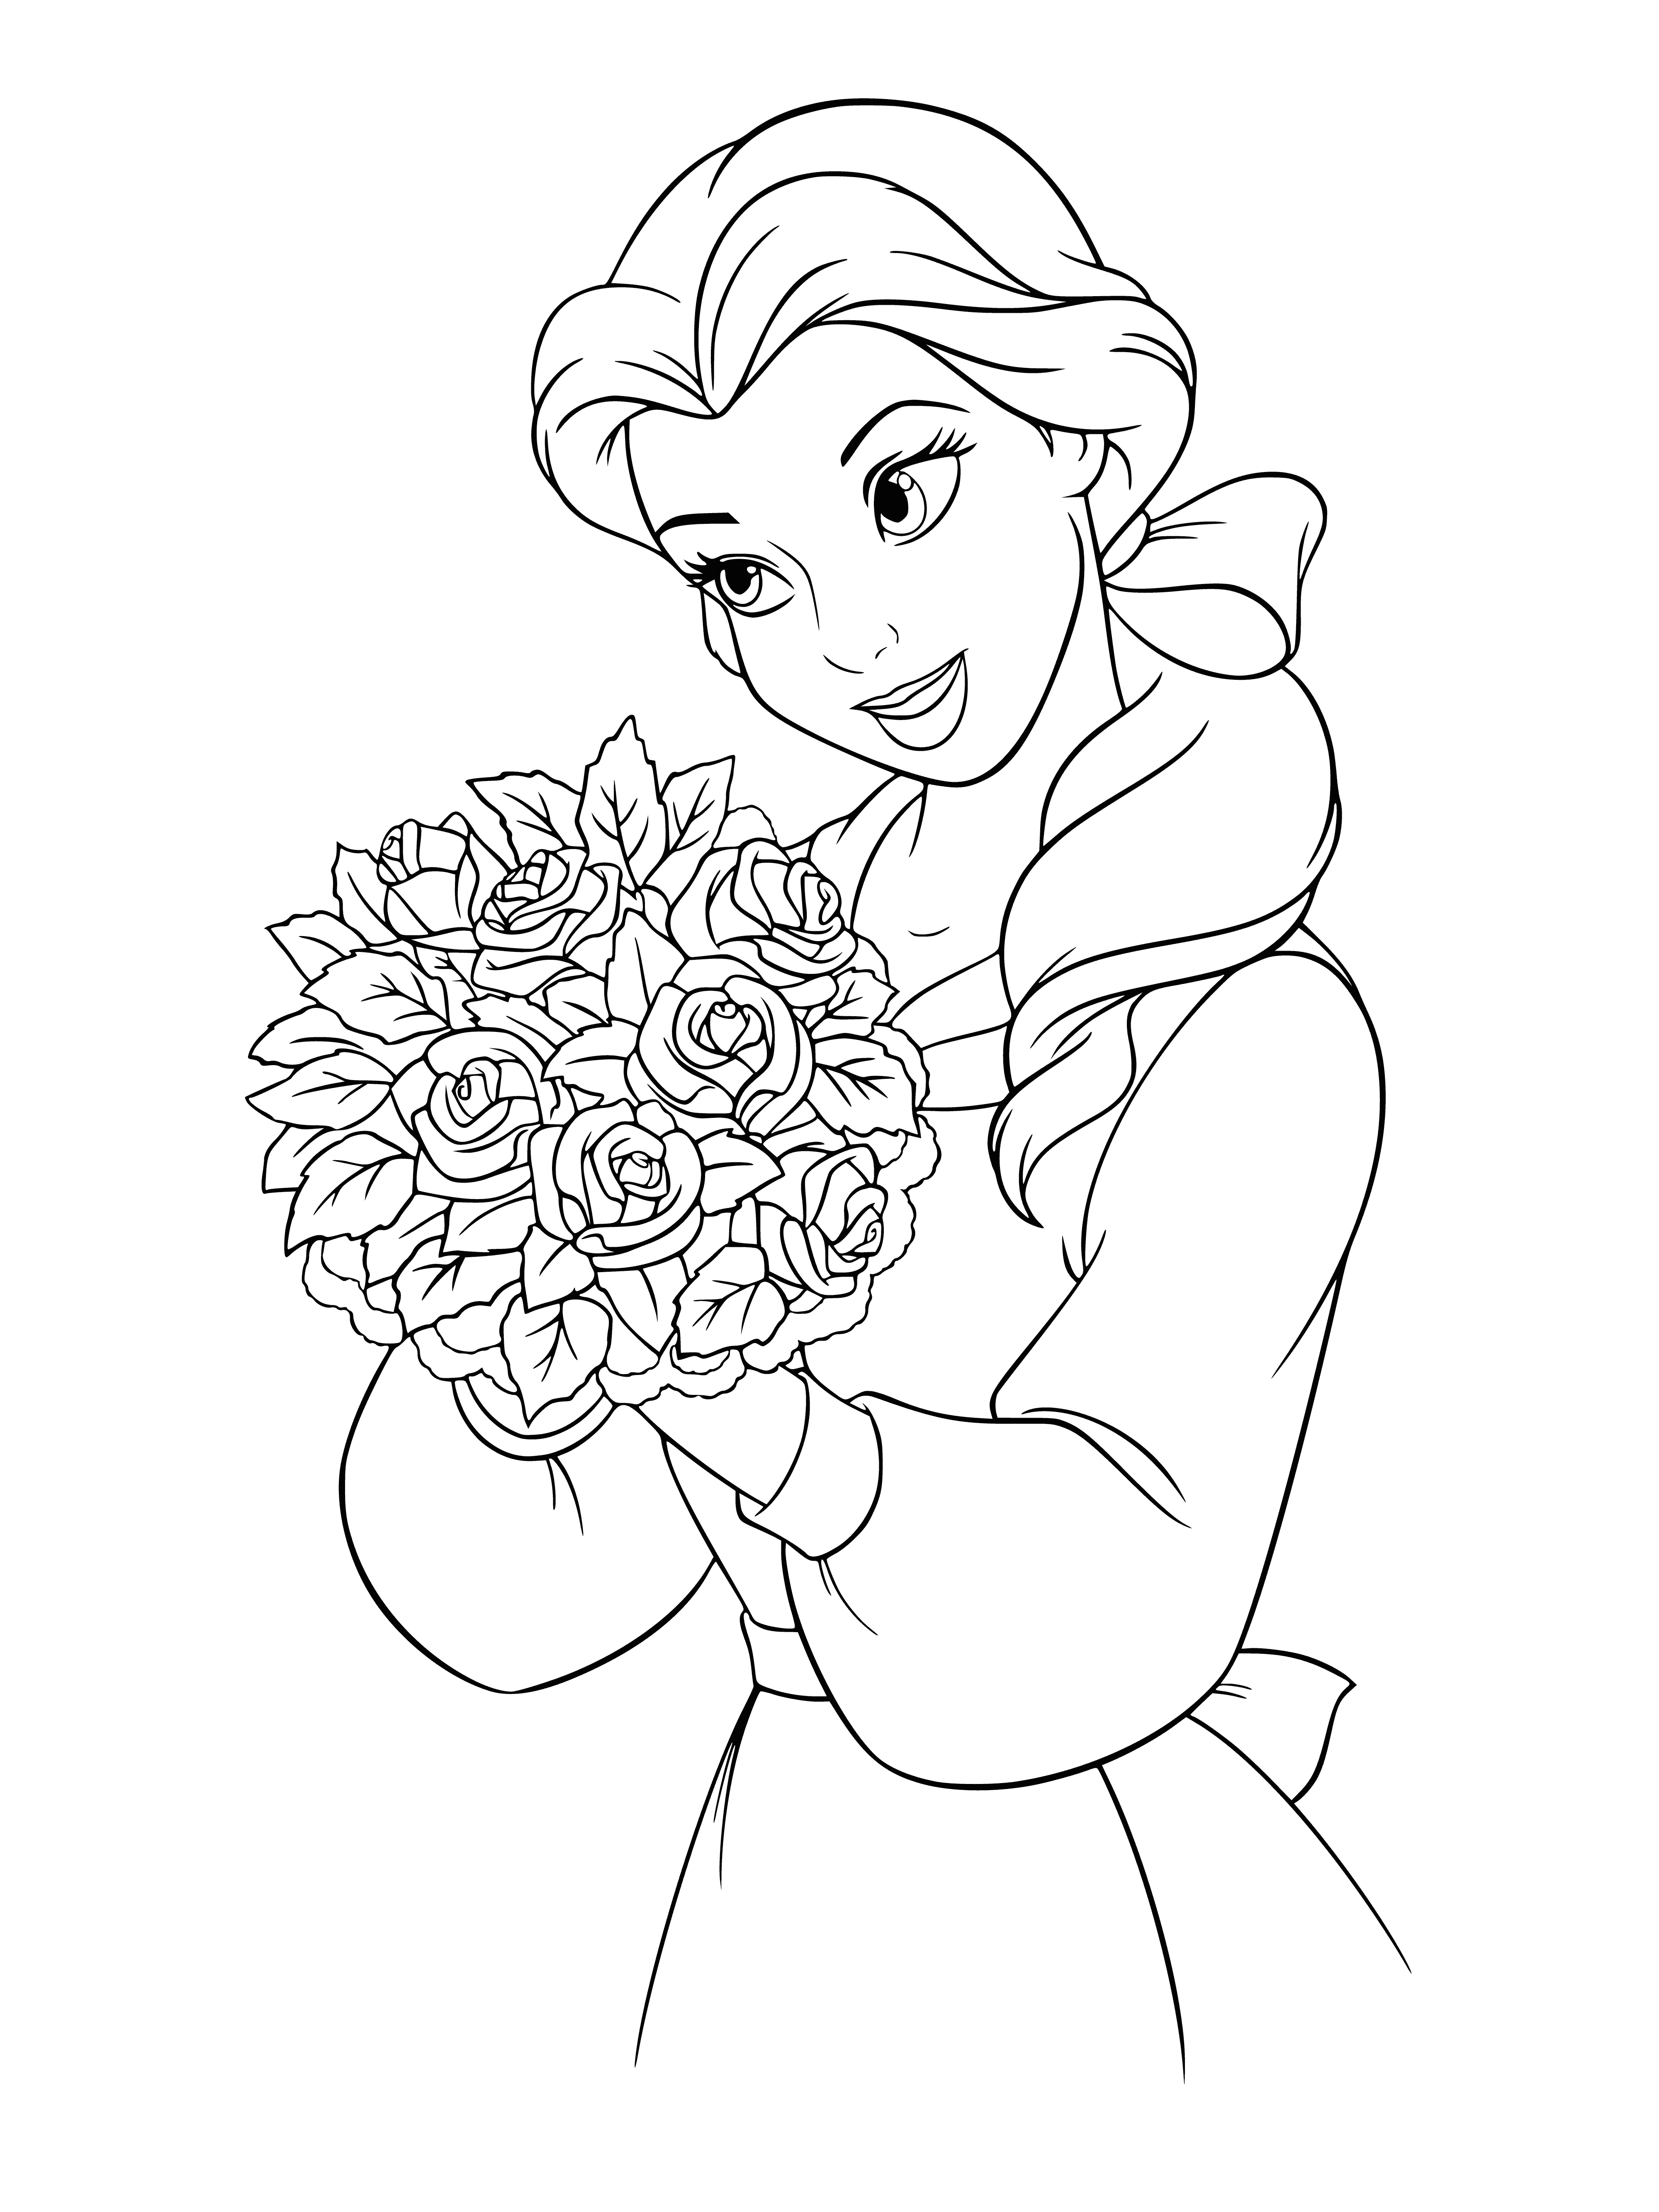 coloring page: Belle smiles as the Beast offers her a bouquet of roses.